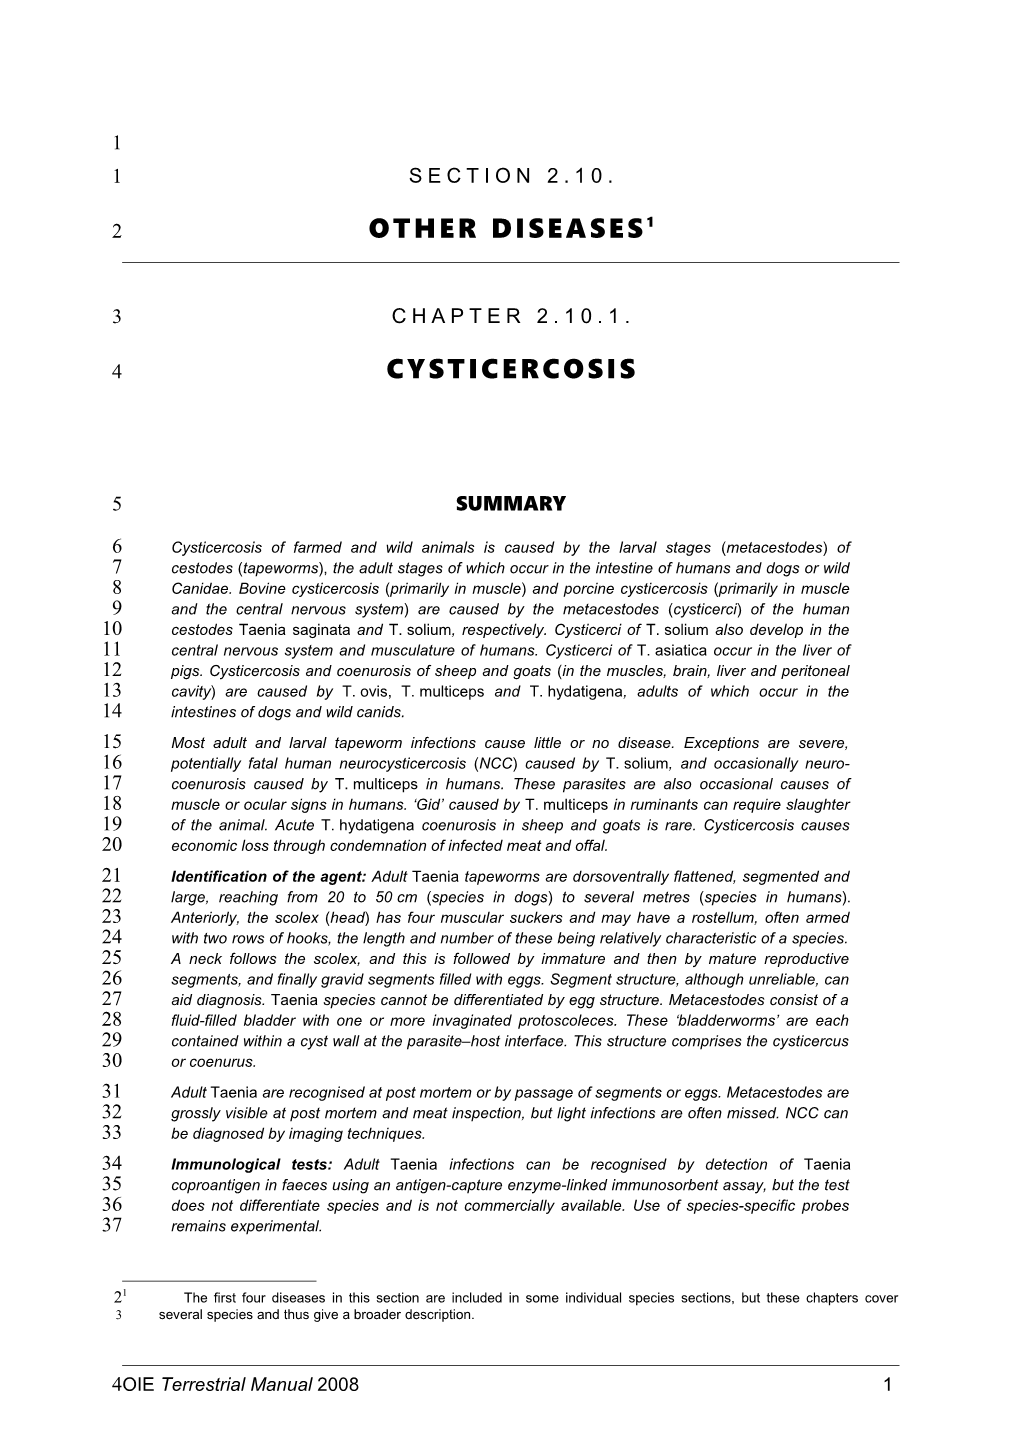 Chapter 2.10.1. Cysticercosis